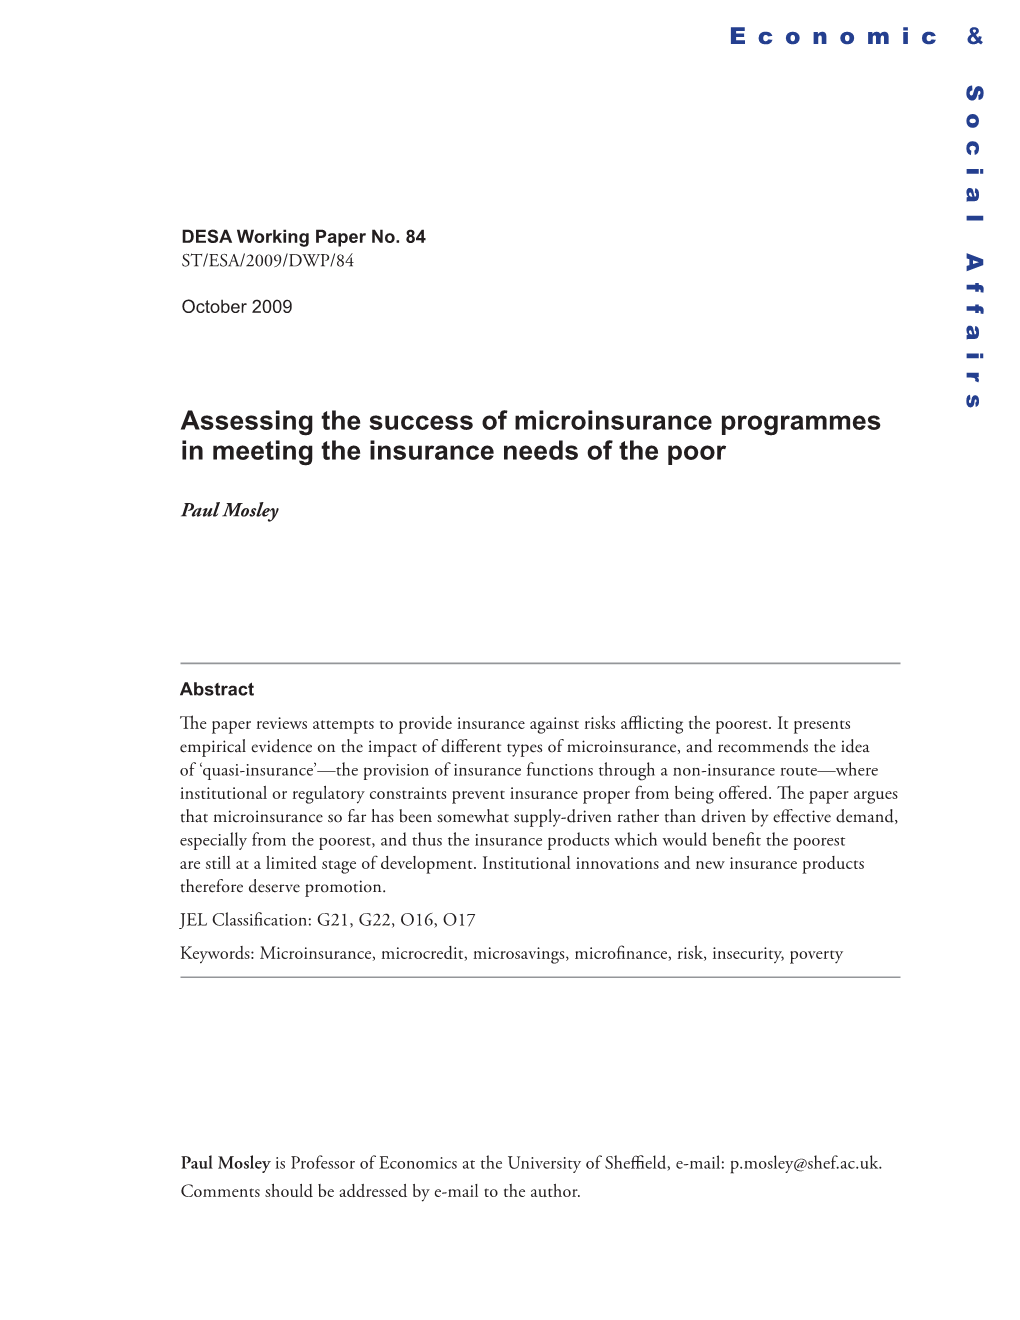 Assessing the Success of Microinsurance Programmes in Meeting the Insurance Needs of the Poor